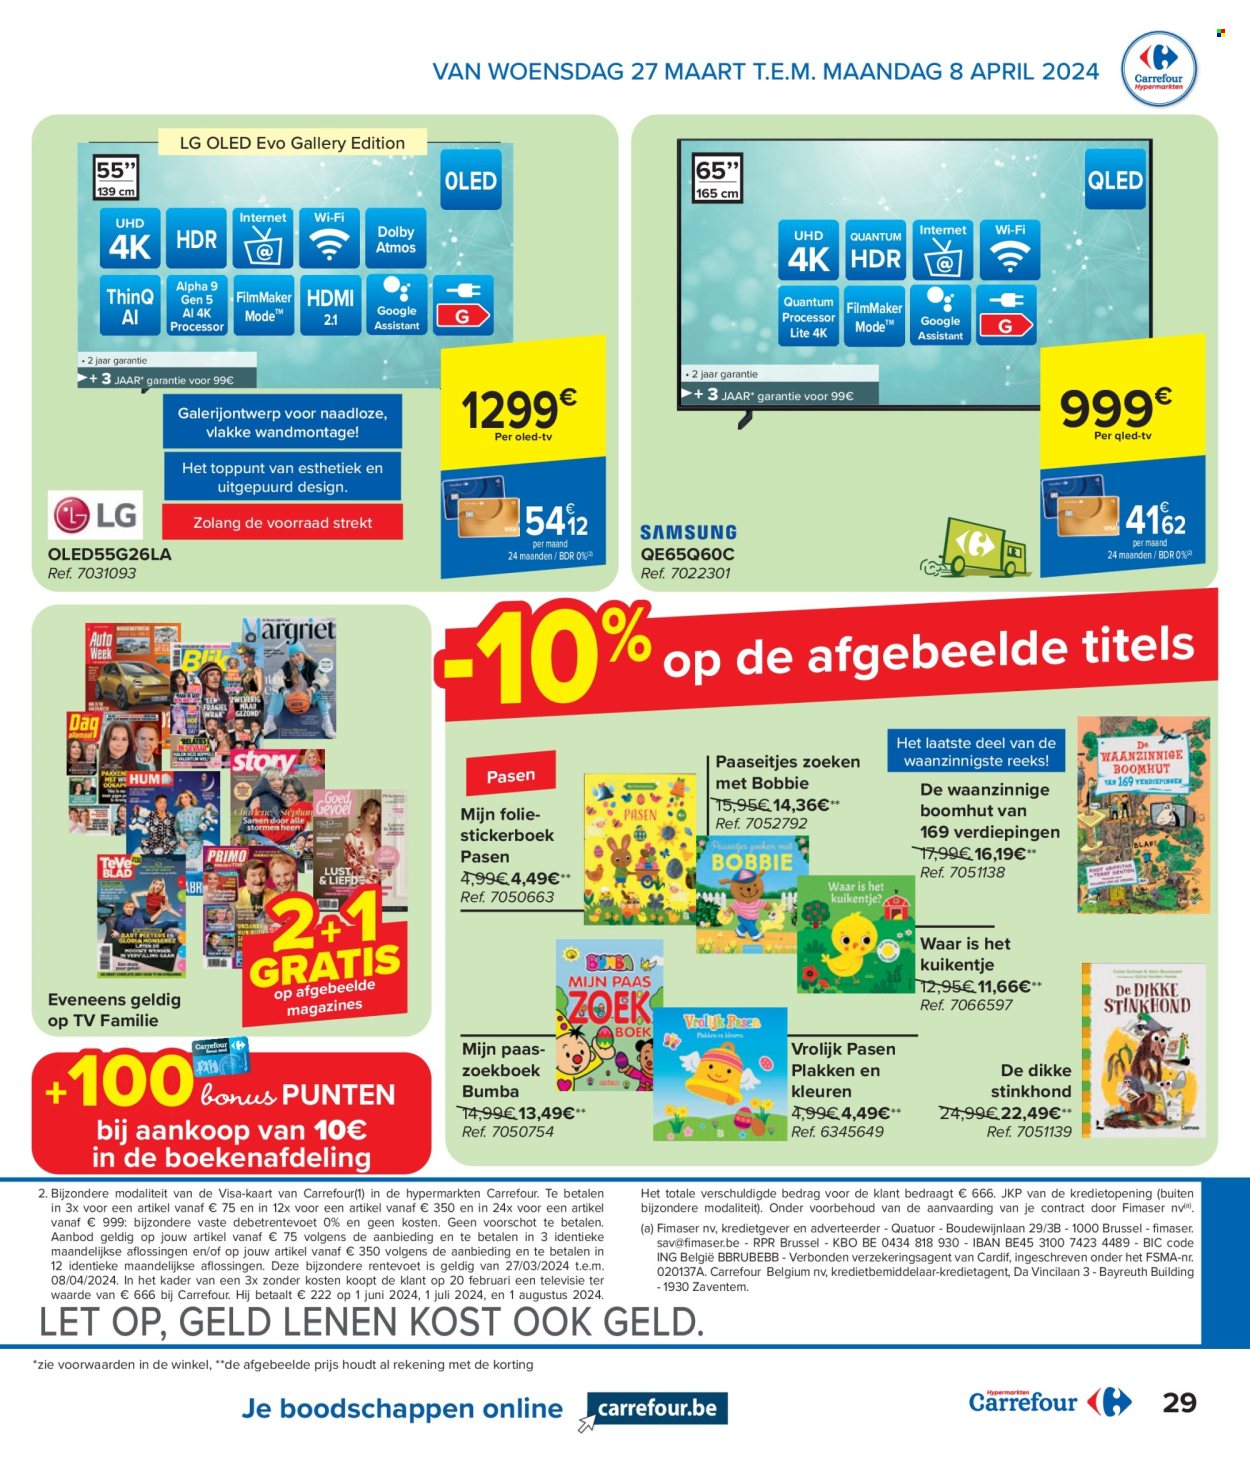 Catalogue Carrefour hypermarkt - 27.3.2024 - 8.4.2024. Page 29.